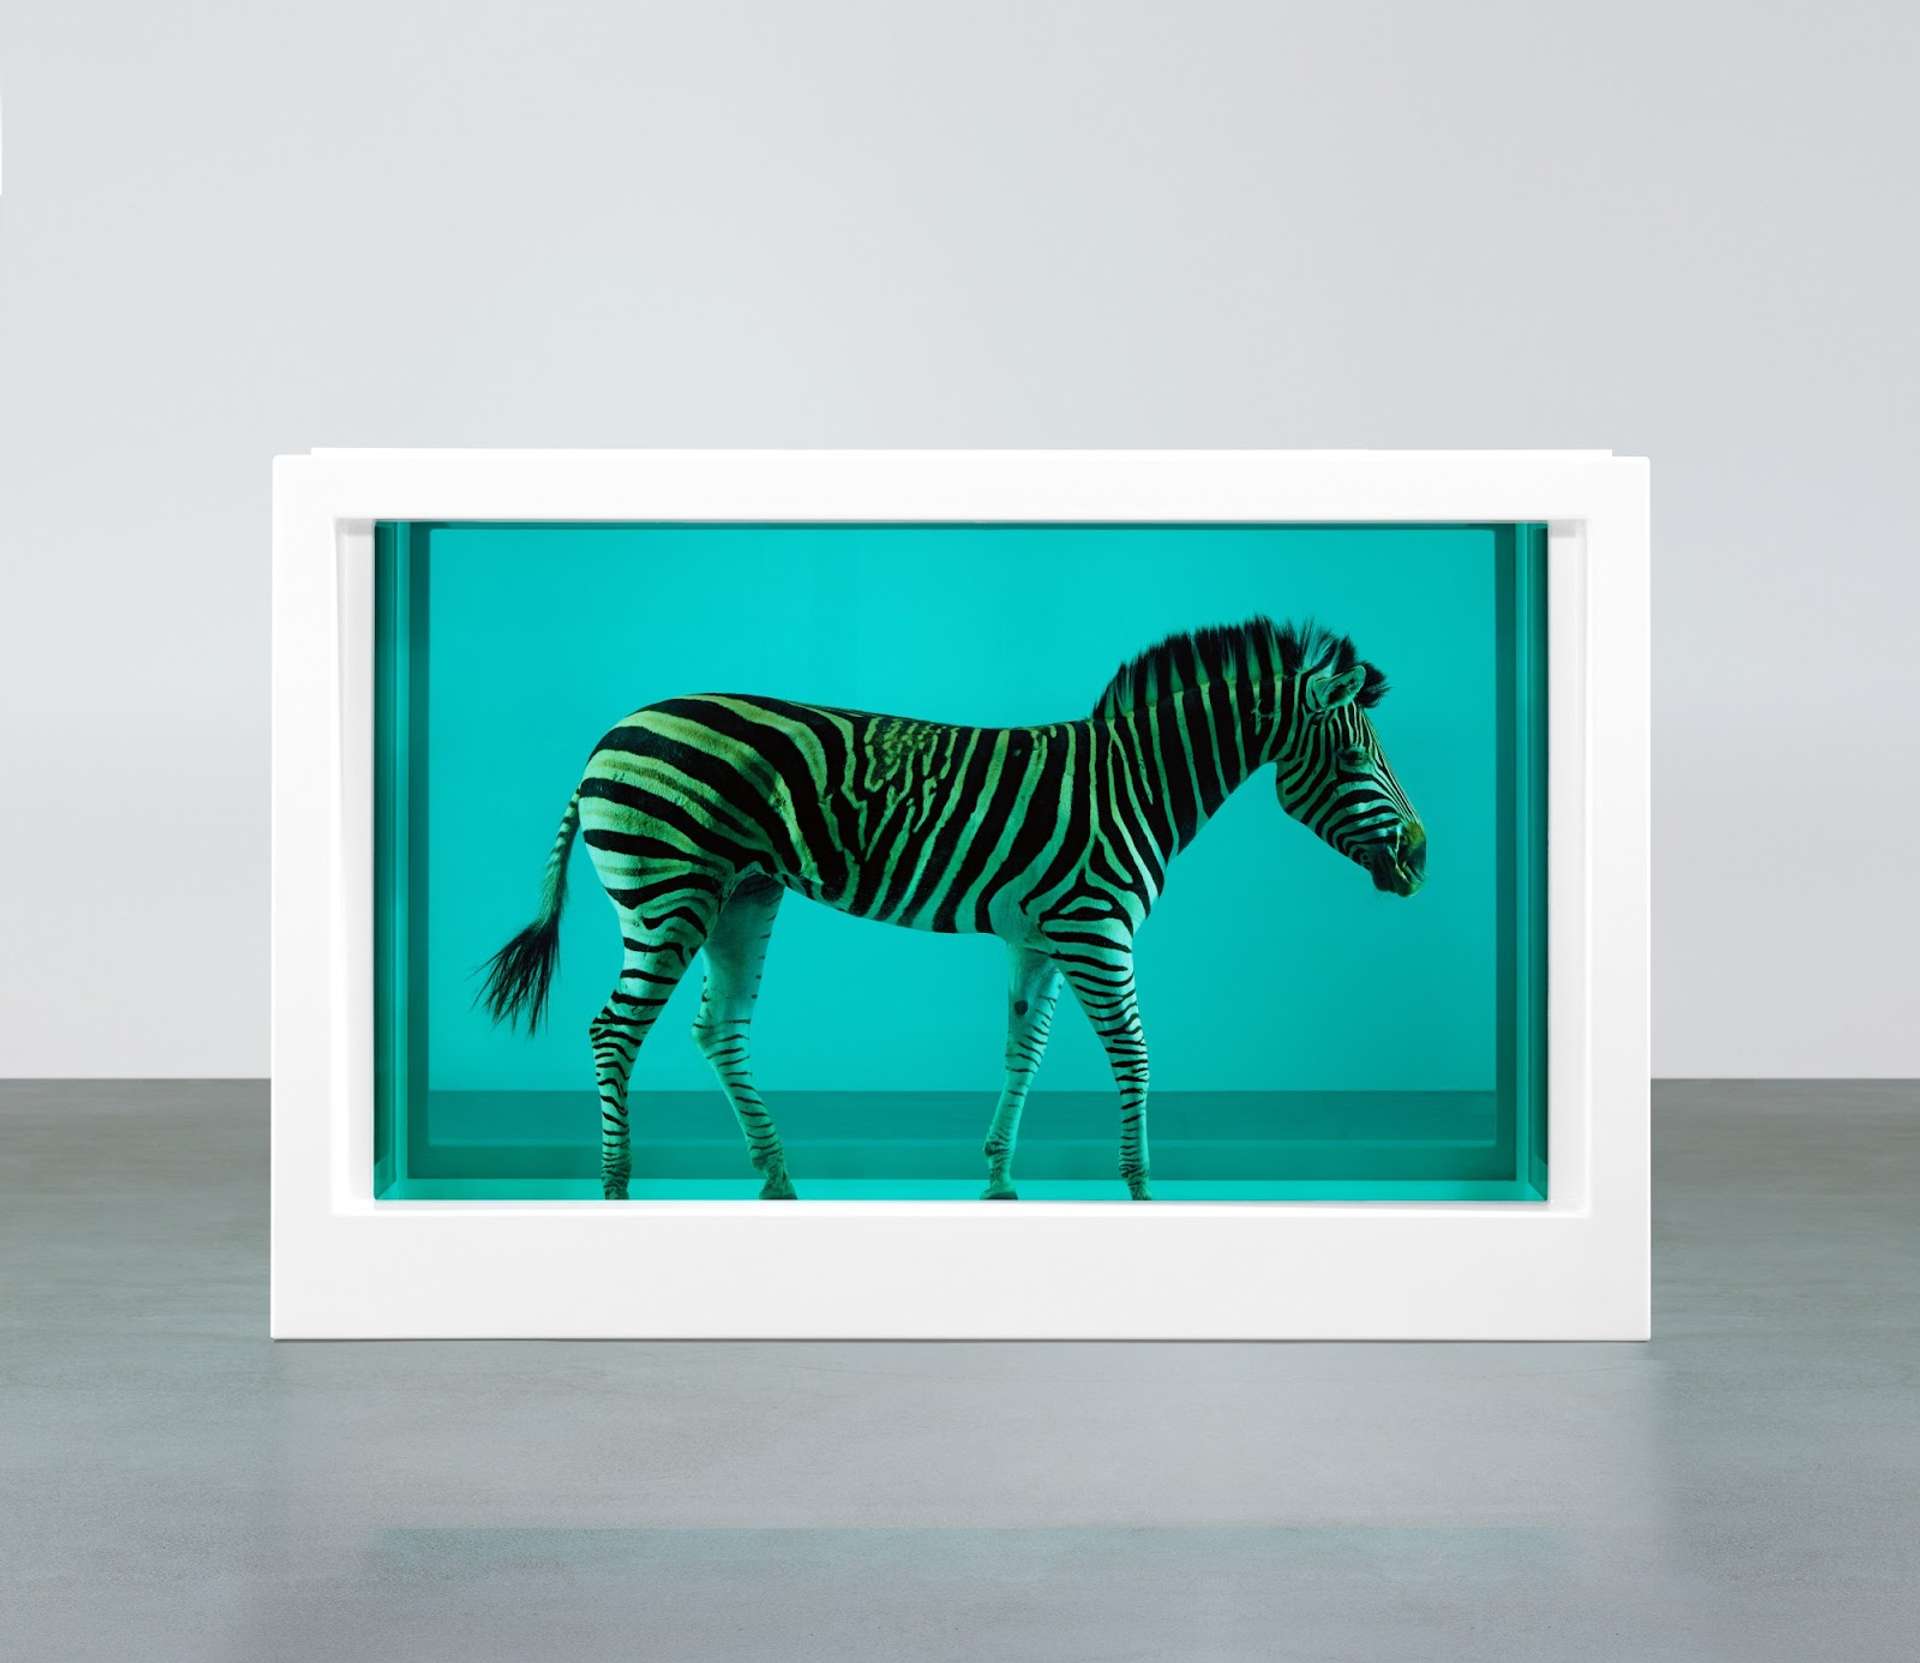 An image of the artwork The Incredible Journey by Damien Hirst. It is composed of a zebra’s body, immersed in formaldehyde. The tank containing the animal is encased in a white frame.